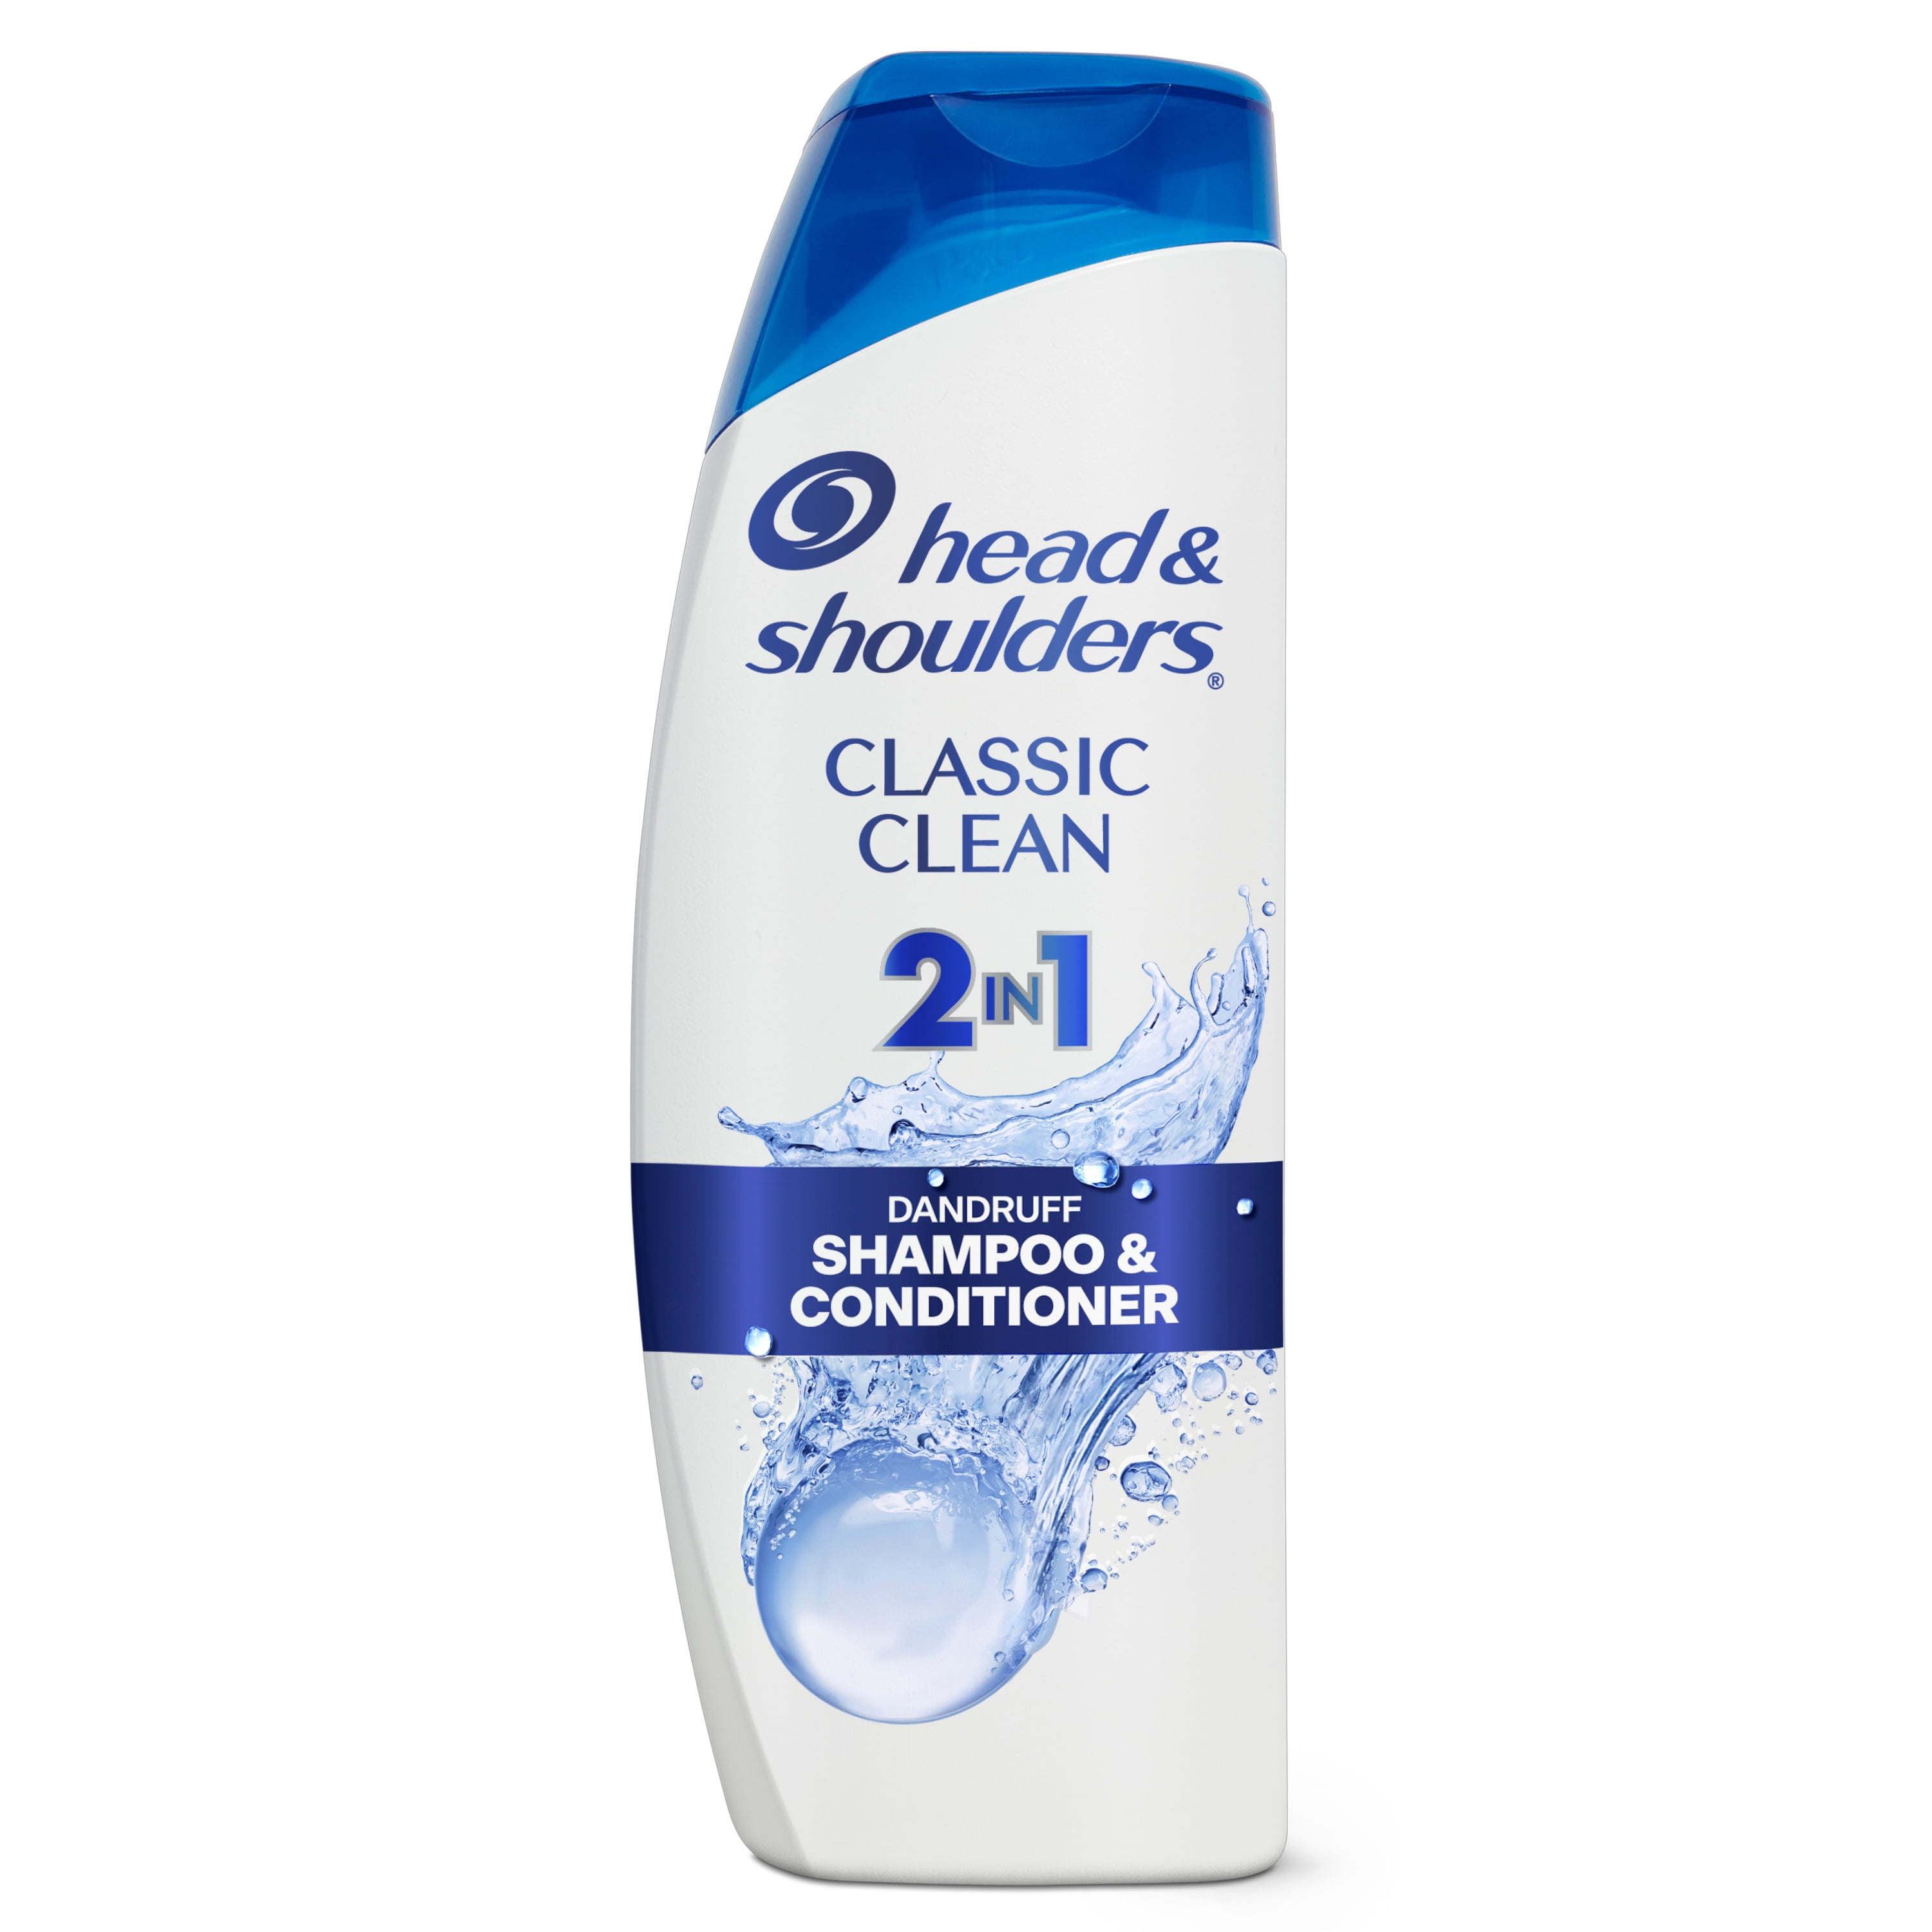 Head and Shoulders 2 in 1 Dandruff Shampoo and Conditioner, Classic Clean, 12.5 oz